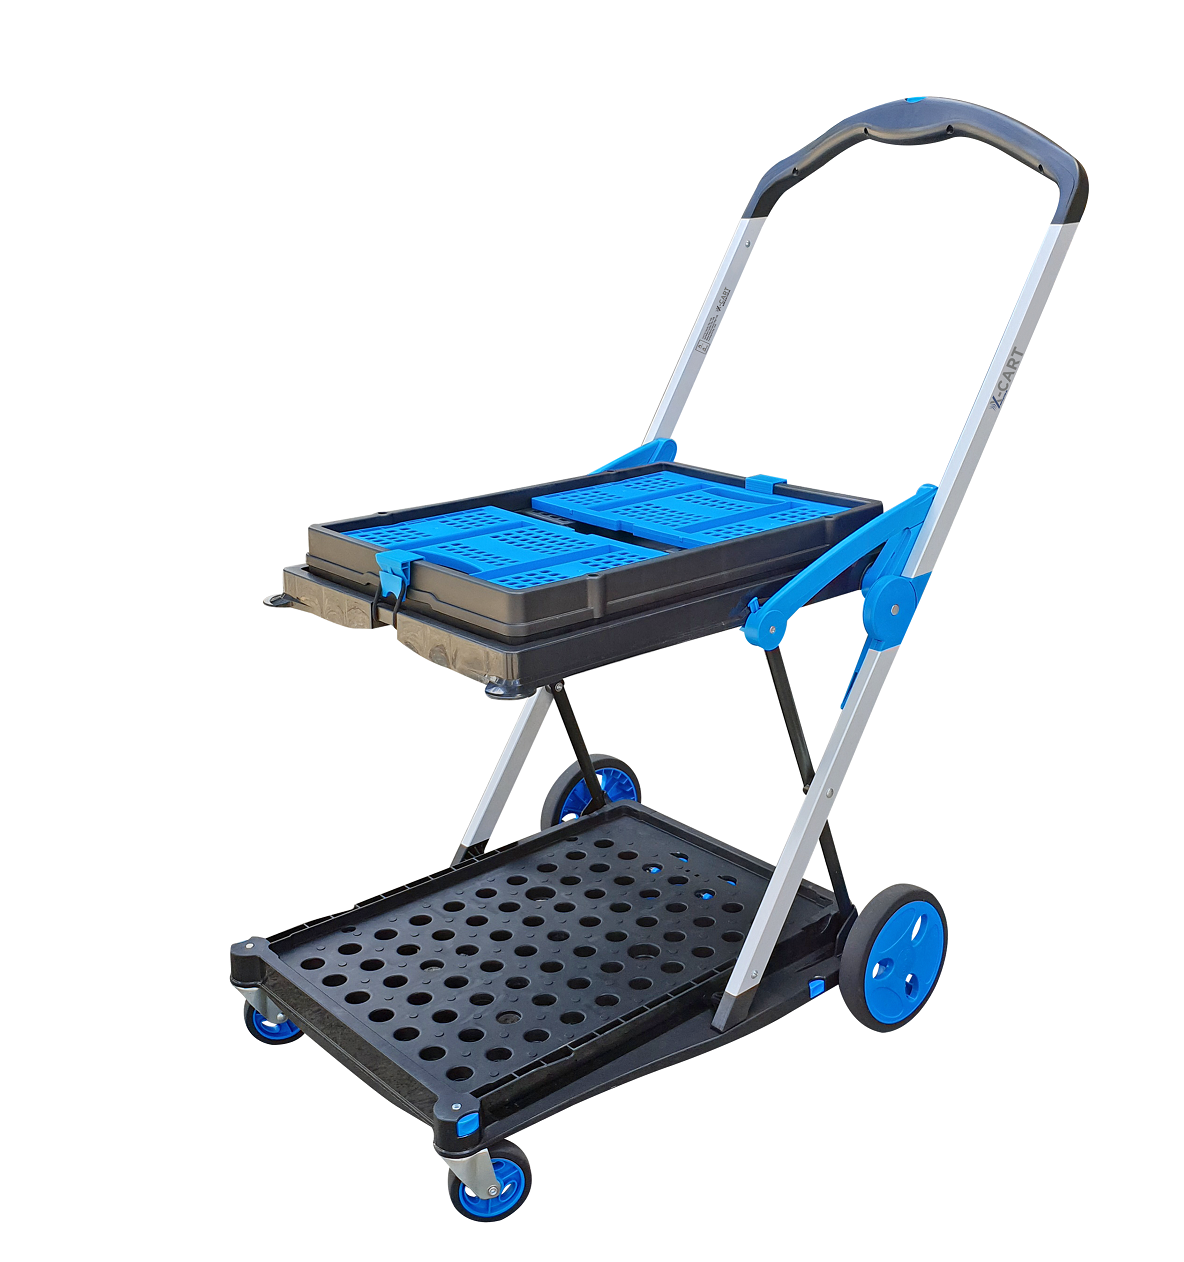 X-Cart-With-Basket-Folded-1-reduced